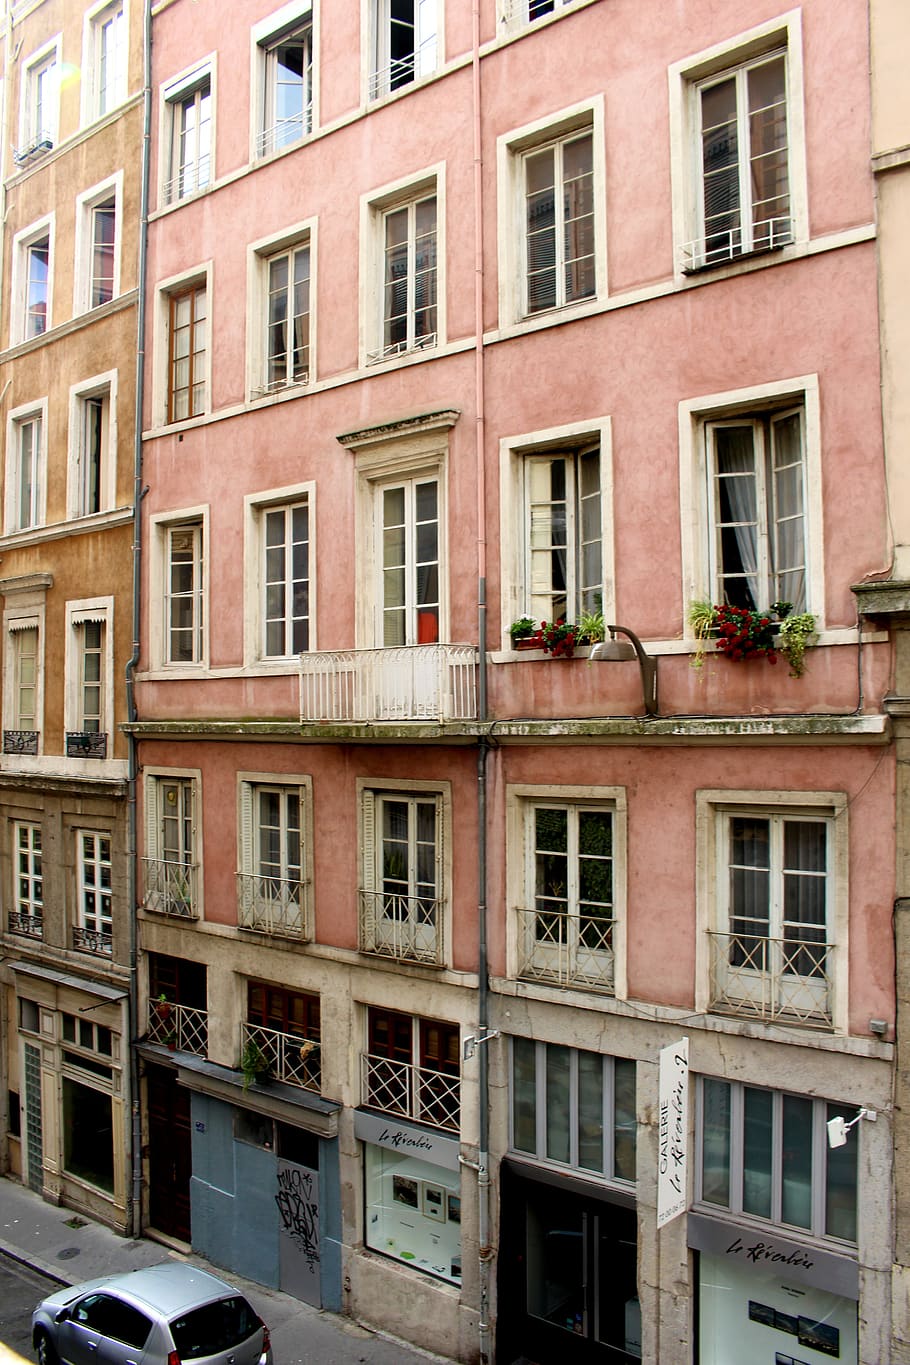 lyon, france, window, architecture, city, historically, building, facade, house, dusky pink